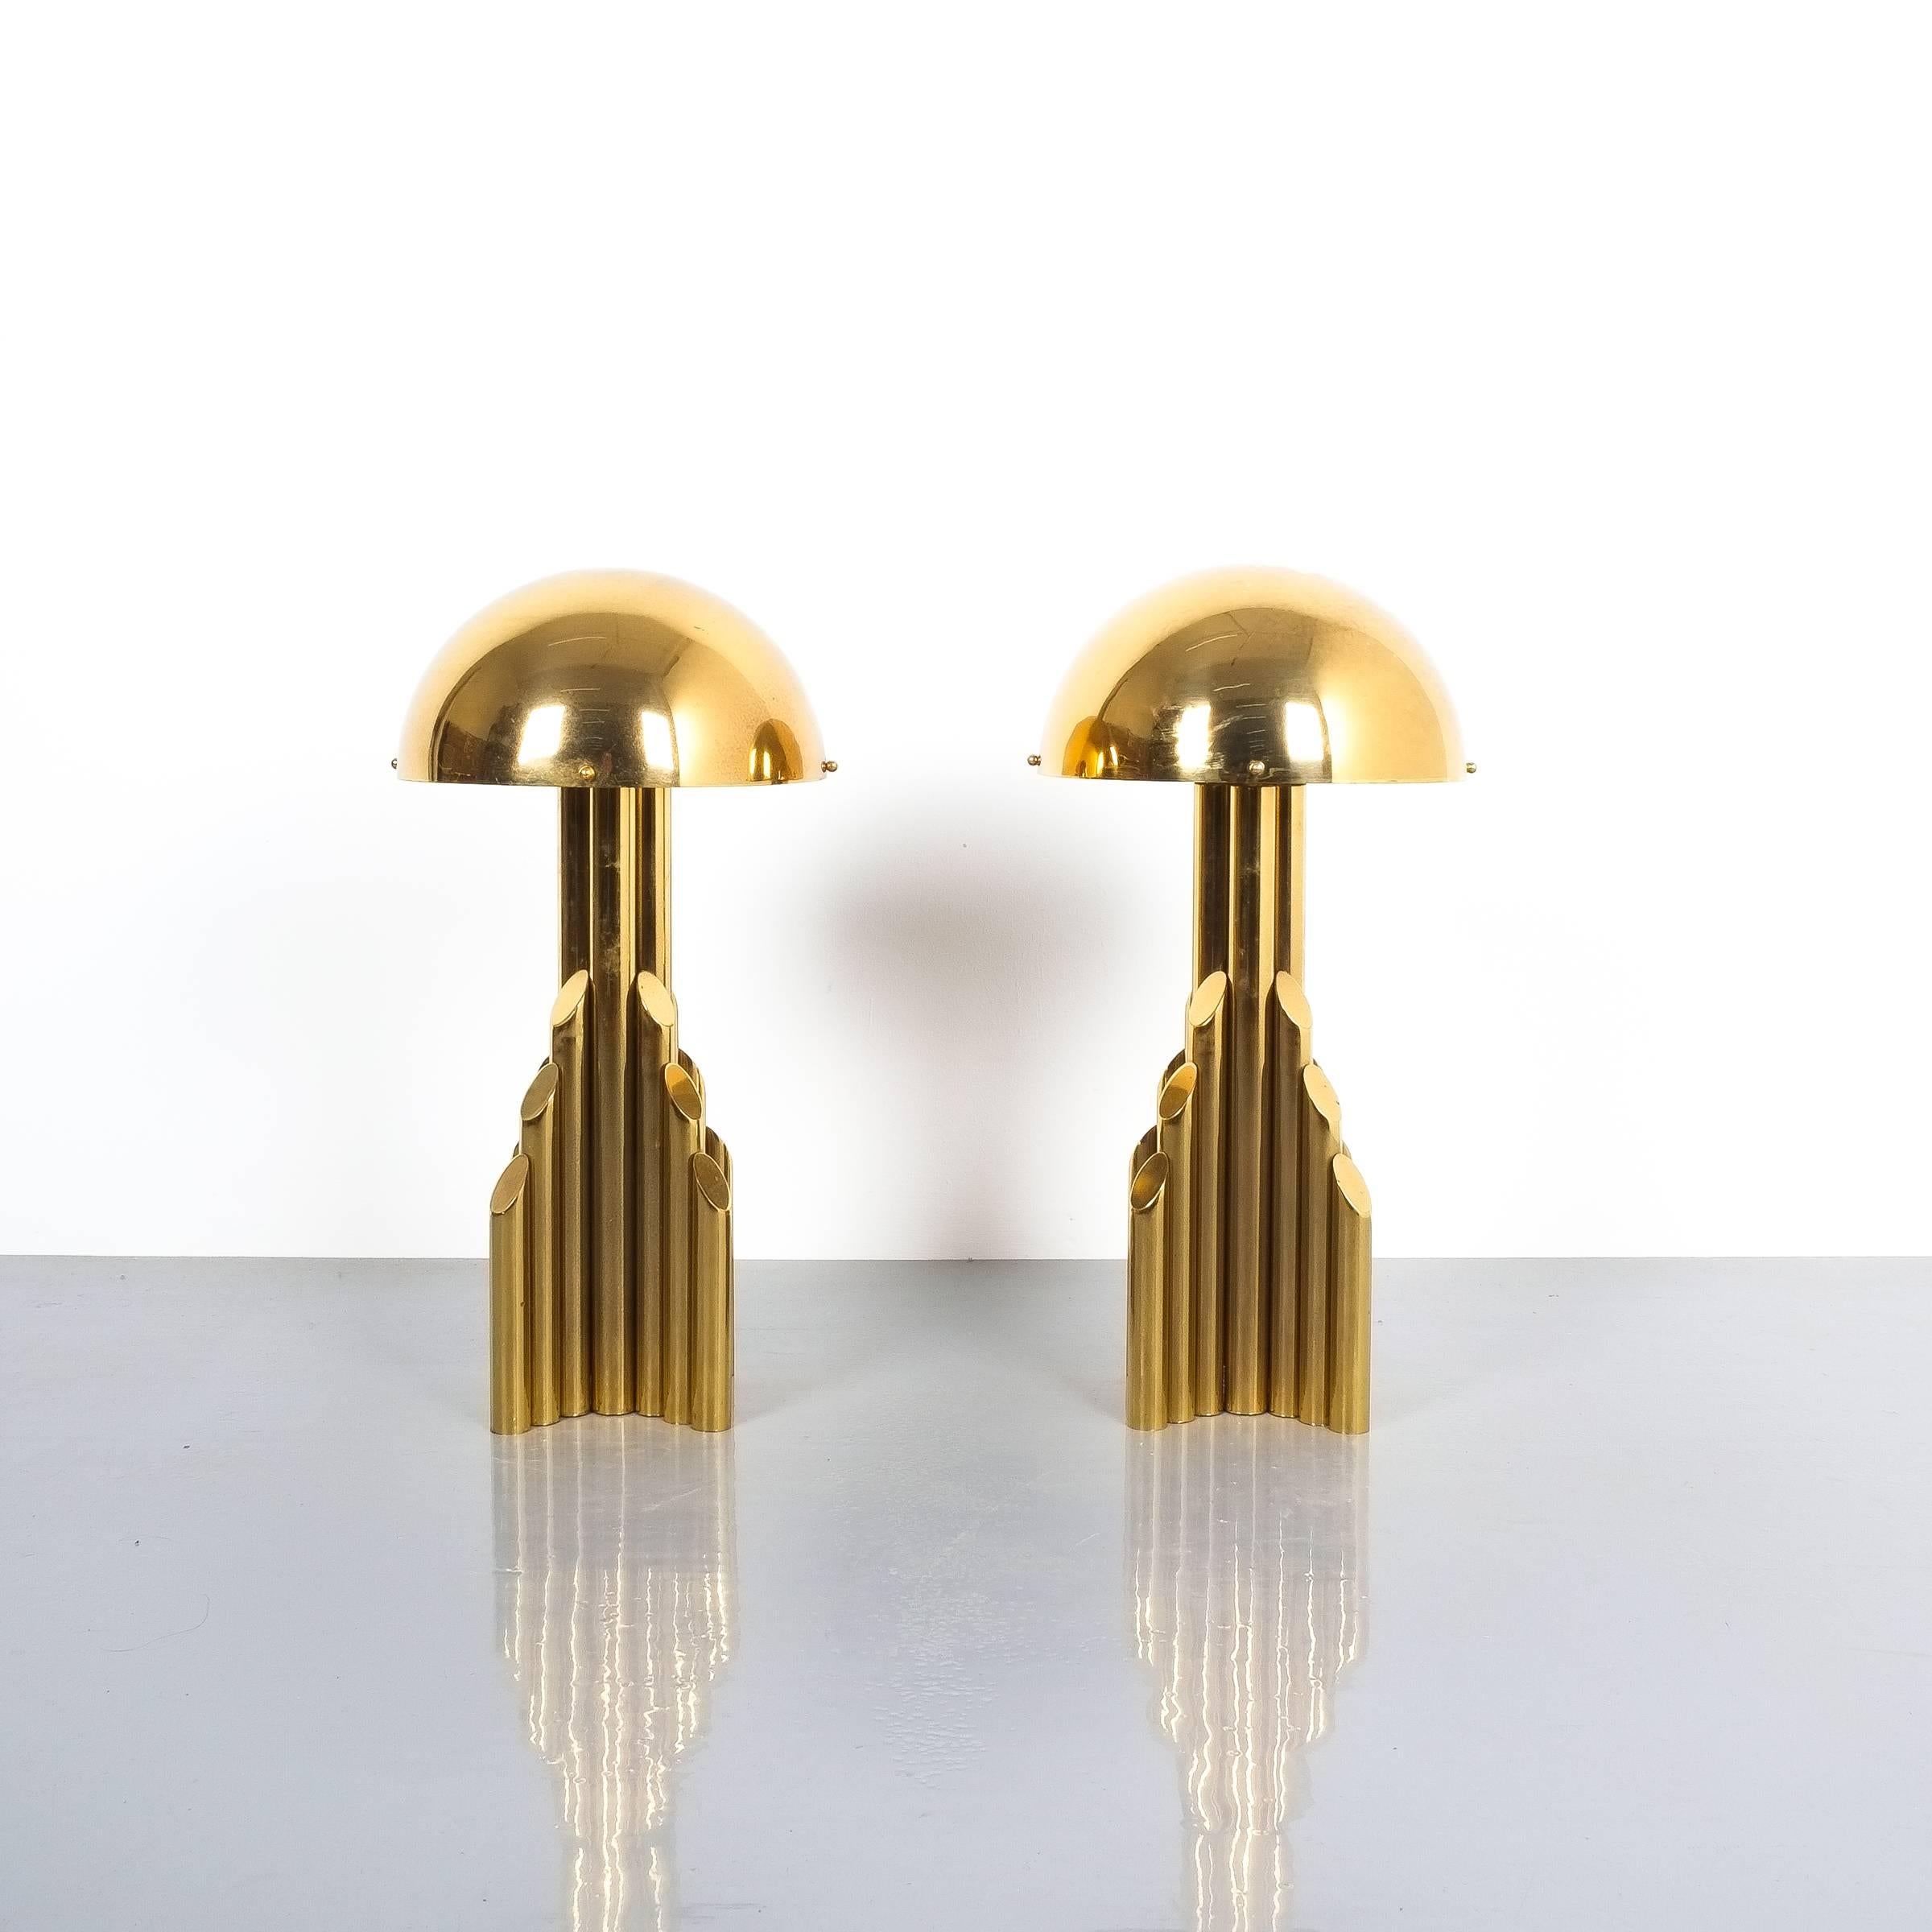 Pair of tubular brass pipe table lamps attributed to Staff, Germany, 1960. Nice pair of geometrical table lights handmade with great attention to detail. Very good condition, two bulbs (e14 with 40W each, or Led's) each. Measurements are 11.41